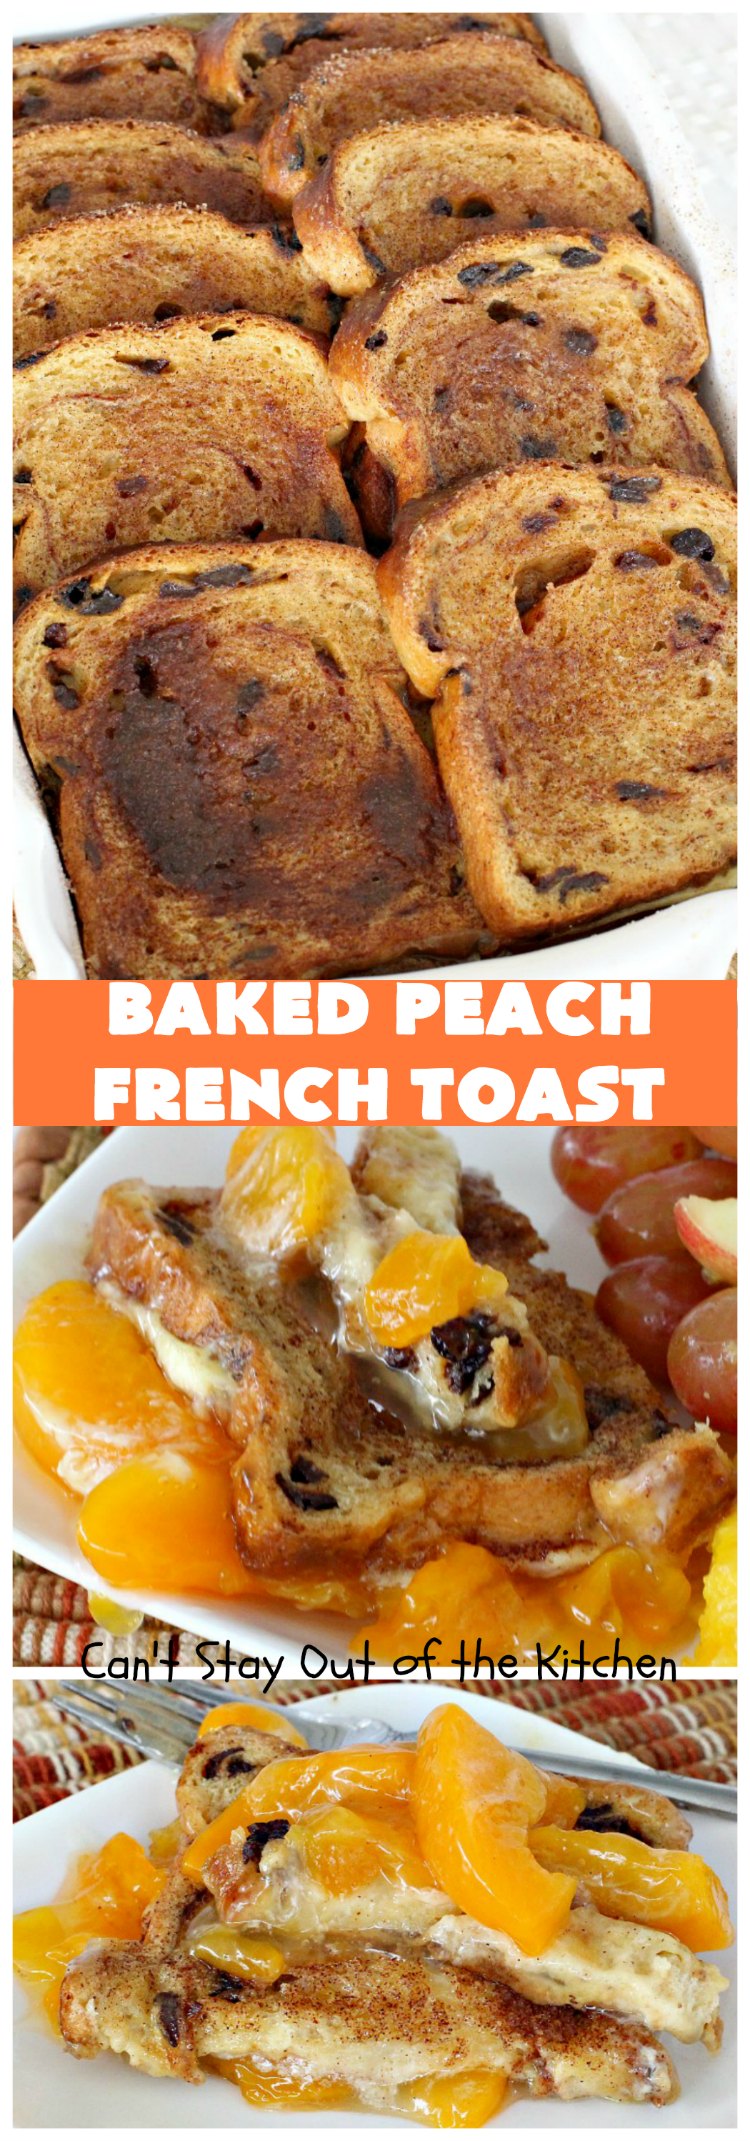 Baked Peach French Toast | Can't Stay Out of the Kitchen | this is a spectacular #FrenchToast #breakfast entree especially for #holidays like #Thanksgiving or #Christmas. It's great for company breakfasts too. It's made with #PeachPieFilling & #CinnamonRaisinBread. #Peaches #PeachFrenchToast #BakedPeachFrenchToast 